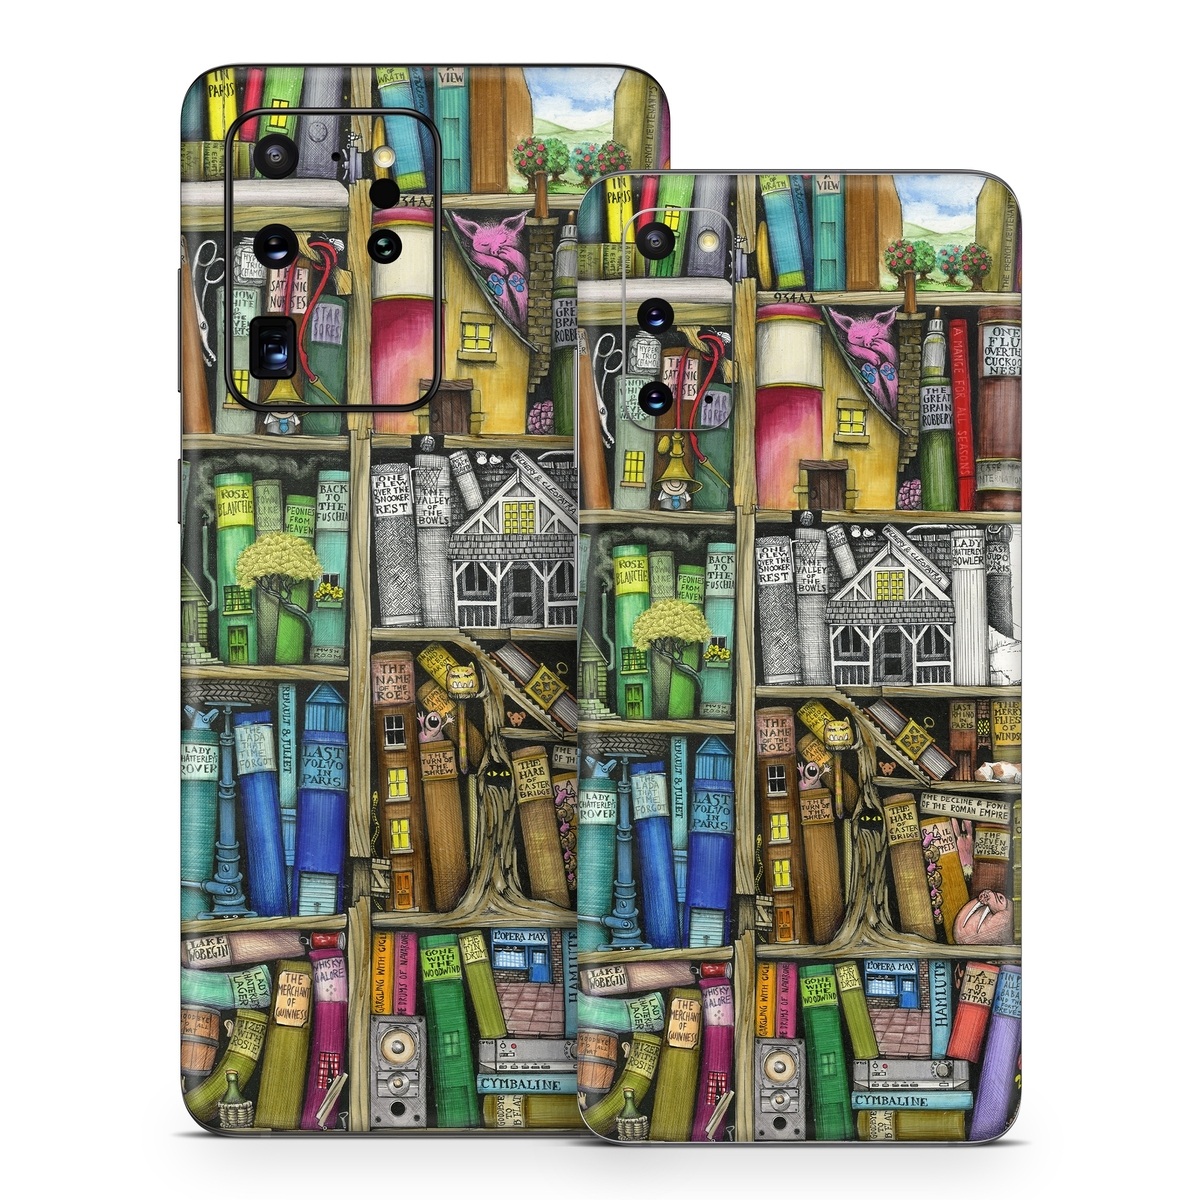 Samsung Galaxy S20 Series Skin design of Collection, Art, Visual arts, Bookselling, Shelving, Painting, Building, Shelf, Publication, Modern art, with brown, green, blue, red, pink colors